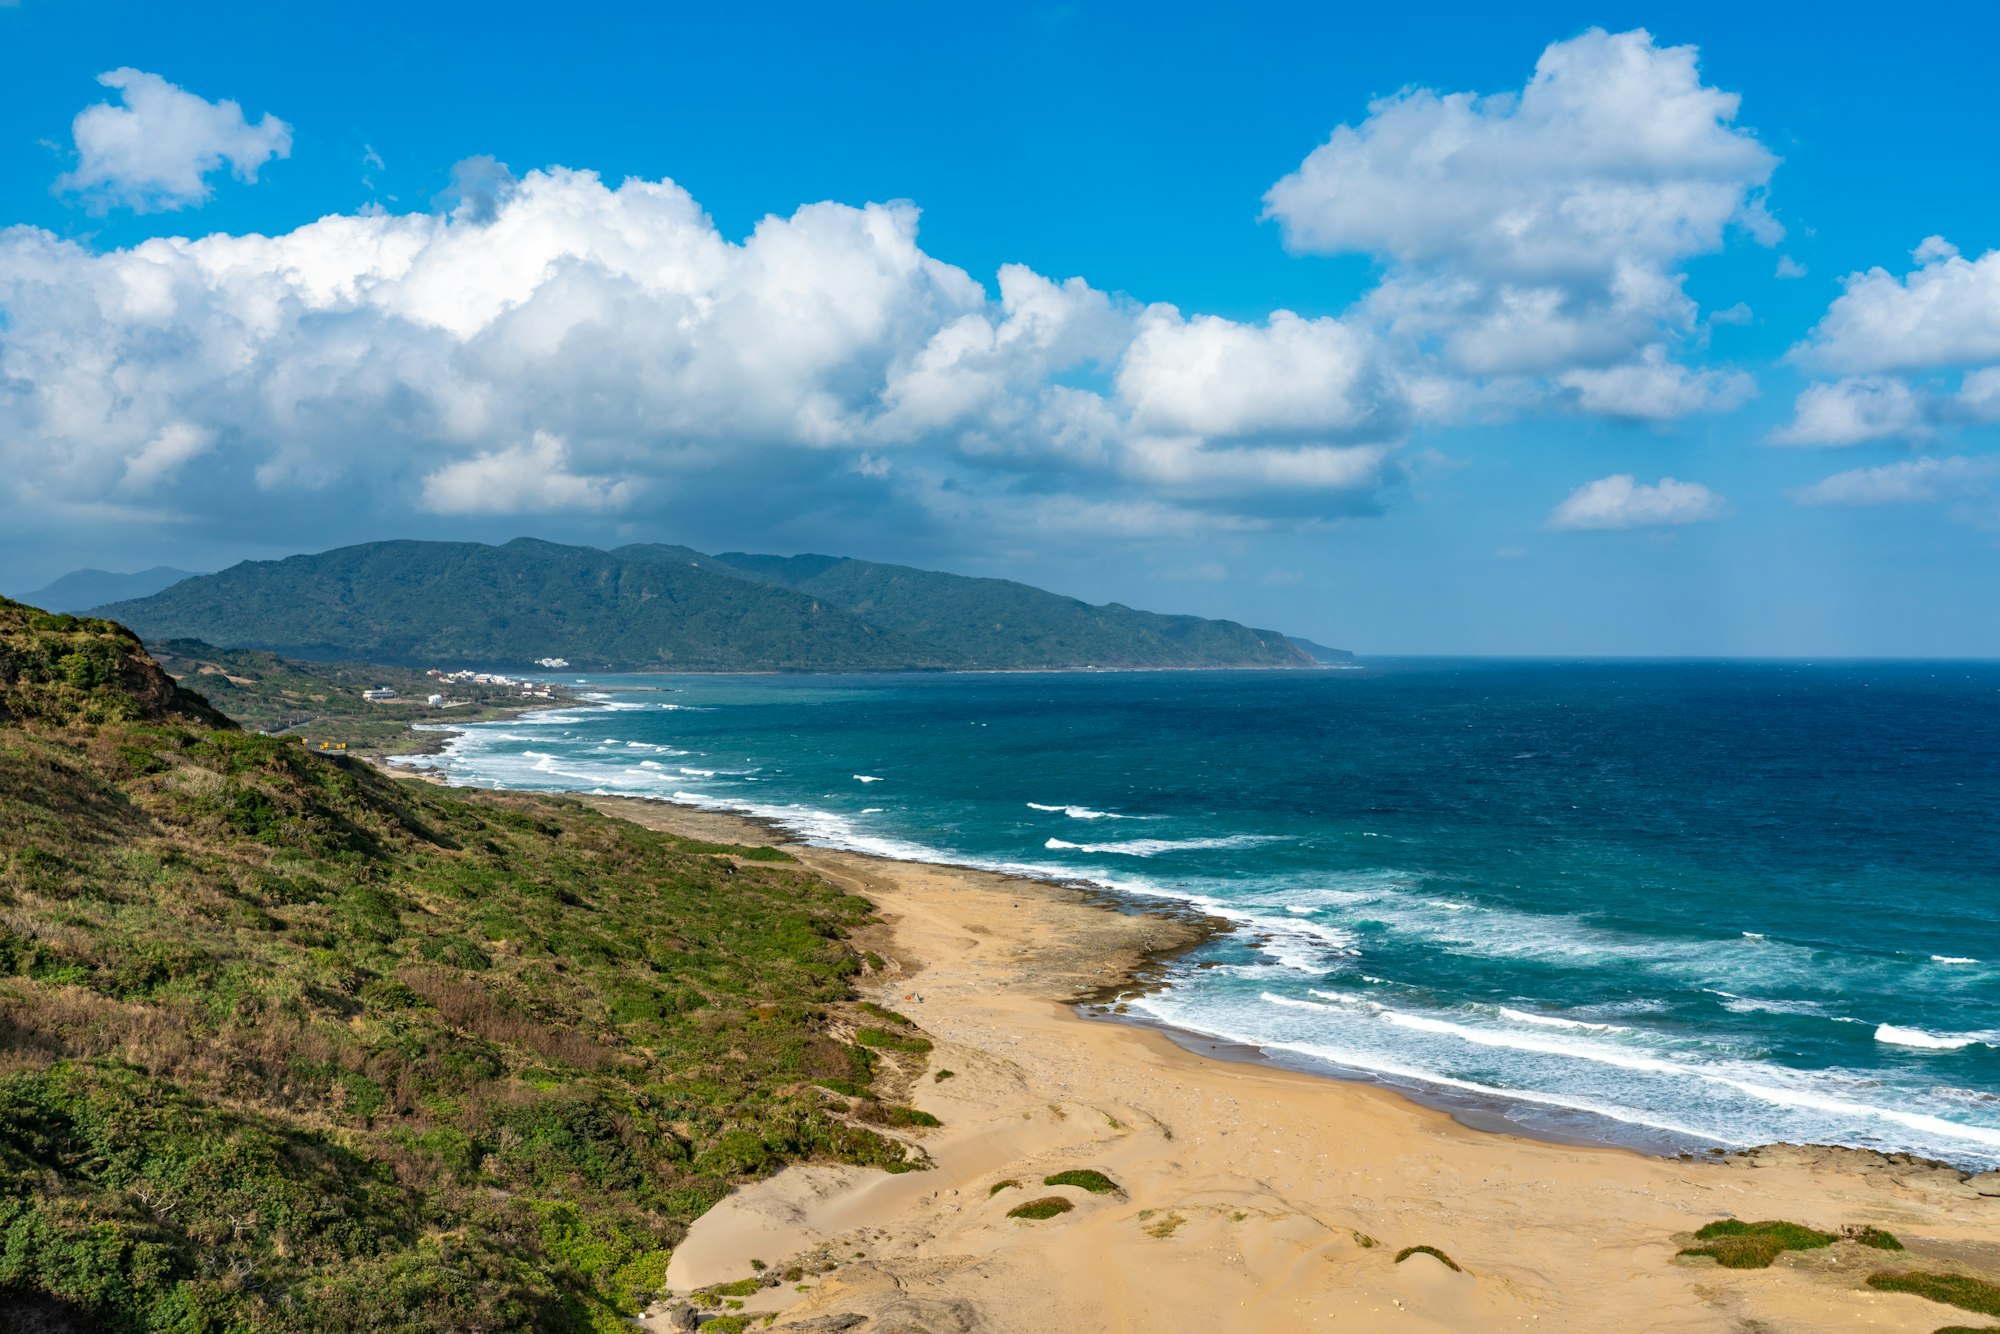 Kenting, near the most southern point of Taiwan